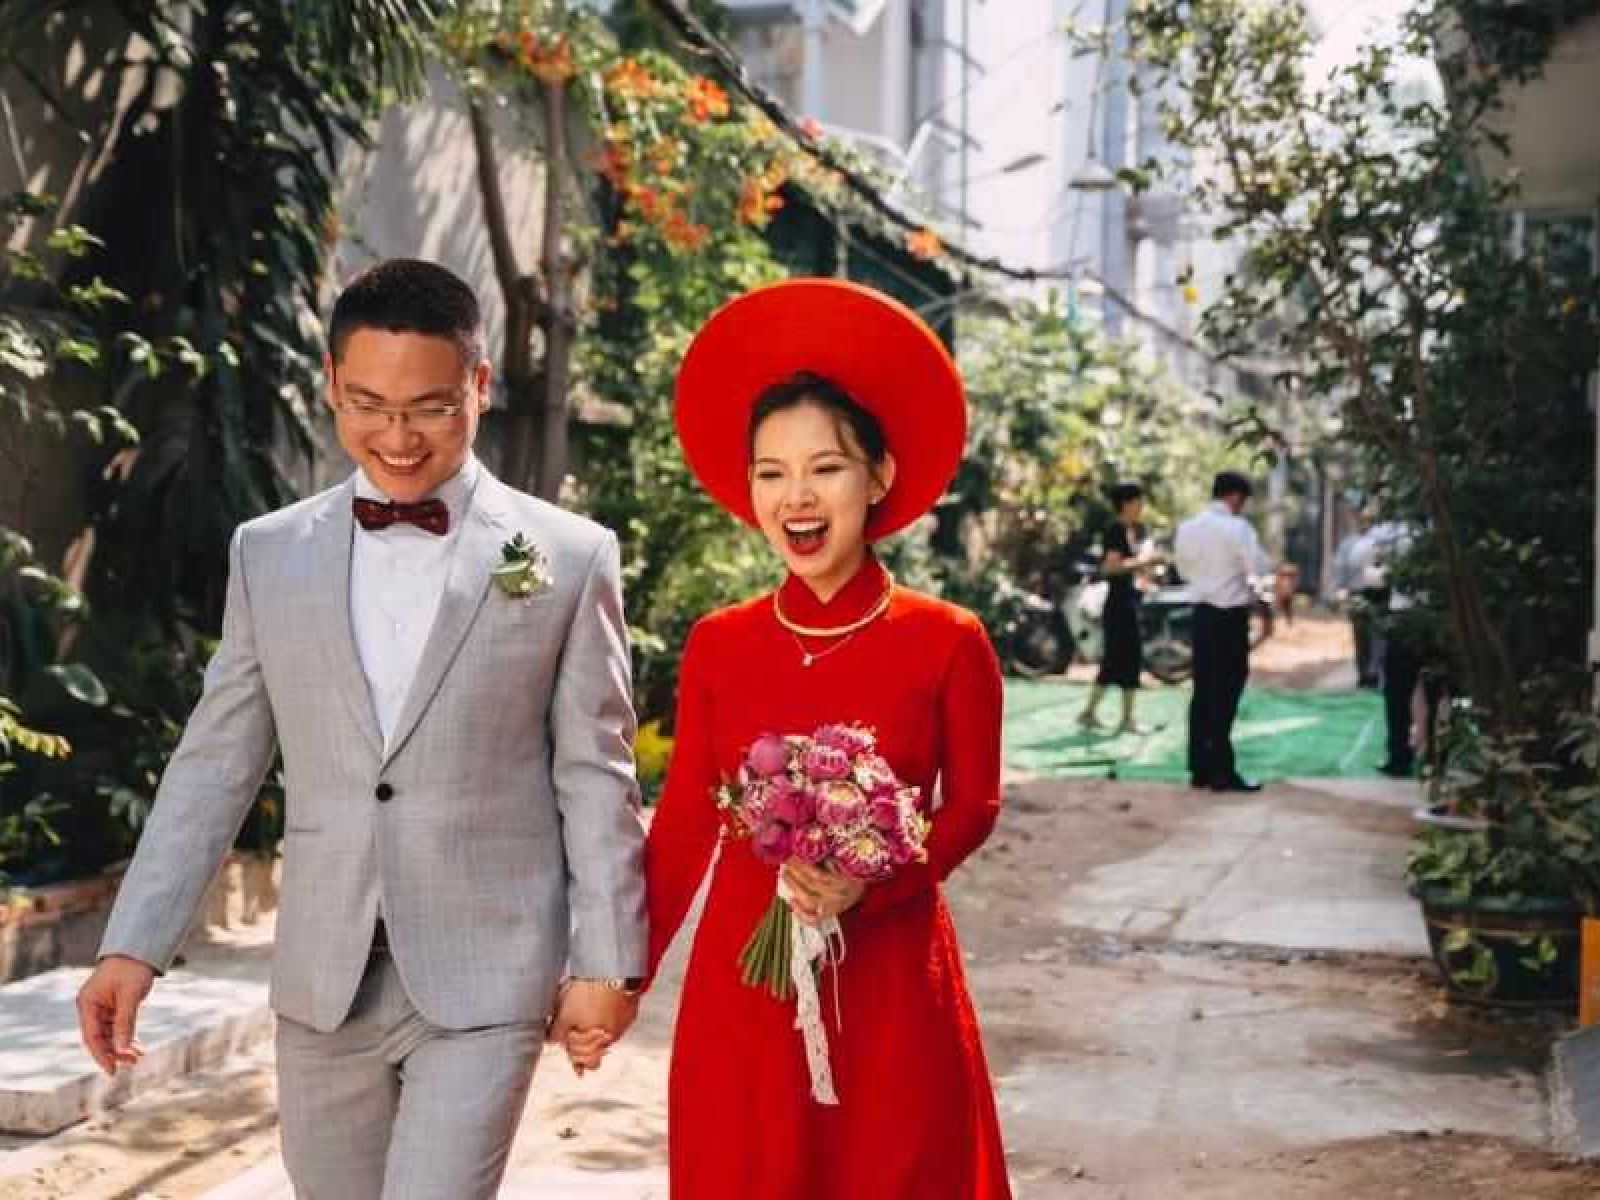 red is more commonly associated with weddings than white